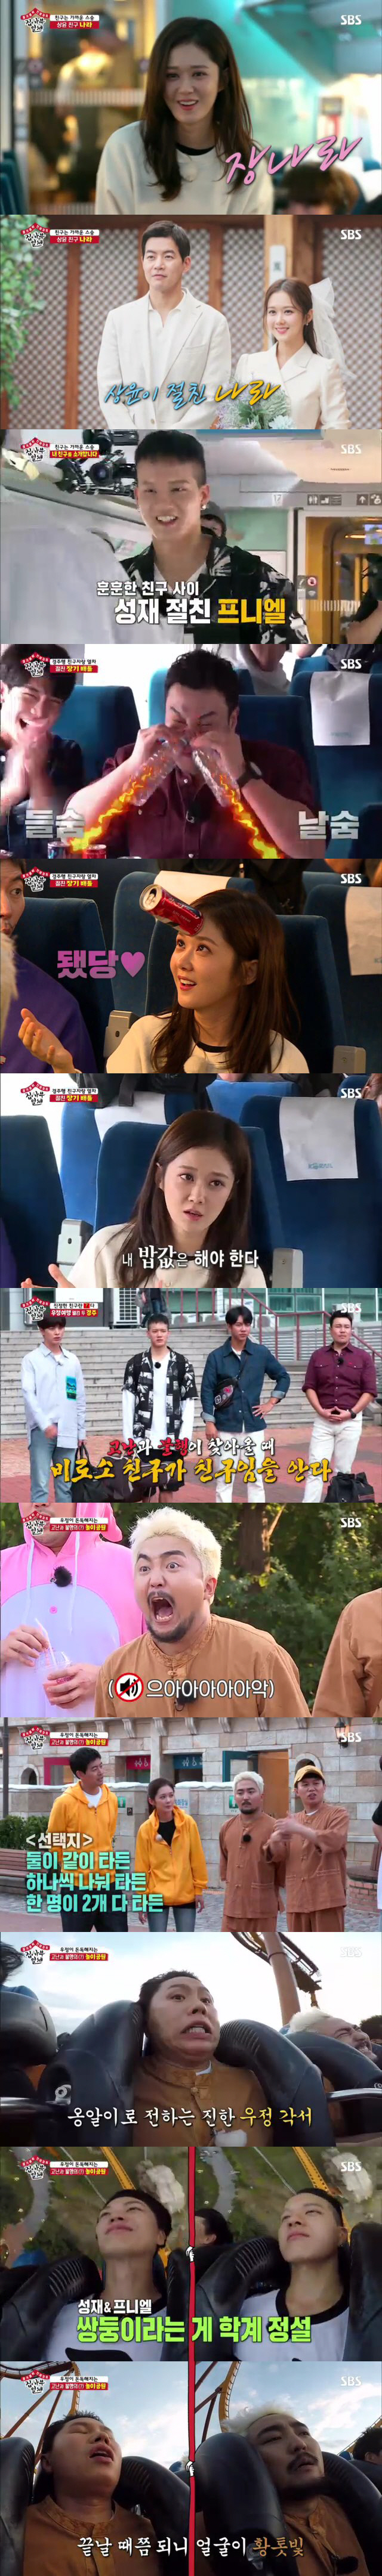 SBS All The Butlers attracted the attention of viewers with a friendship travel special feature that can look back on the meaning of true Friend.According to Nielsen Korea, SBS All The Butlers furniture TV viewer ratings, which was broadcast on the 22nd (Sun), recorded 7.3% (subject 2 in the Seoul metropolitan area) and 2049 target TV viewer ratings, which were collected for young viewers aged 20 to 49, recorded a whopping 3.7%.Top TV viewer ratings per minute soared to 8.4 percent, attracting attention.The broadcast was featured in the Friend Master feature, and a moisturizing trip to Gyeongju was drawn with friends invited by Lee Seung-gi, Lee Sang-yoon, Yang Se-hyeong and Yook Sungjae.The members invited Friend, who had the most to learn. Lee Sang-yoon said of Friend, who he invited, Personality is not insane.It is serious, he said. It is a friend with many talents in various fields.With the question of who the invited Friend would be, the actor Jang Na-ra, the friend of Lee Sang-yoon, first appeared and led the cheers of the members.I was a bit serious and uninterested, so I was not good at entertainment (Lee Sang-yoon) and told me not to worry.I said I will take care of everything. Then Jang Na-ra said, I feel like this boss on my team, Lee Sang-yoon, who is breathing in the drama VIP to be broadcast.I am going to do it and it is the funniest thing on our team. Followed by Friend Yoo Byung-jae of Yang Se-hyeong, Friend actor Shin Seung-Hwan of Lee Seung-gi, and Friend Bitoubi Peniel Shin of Yook Sungjae.Lee Seung-gi said that Shin Seung-Hwans advantage was a good catcher.Shin Seung-Hwan, nicknamed Jung Seung-hwan, showed his organs by blowing a PET bottle with his nose and attaching a can to his forehead.However, Yoo Byung-jae also easily blew a PET bottle with his nose, followed by Jang Na-ra, who succeeded in two organs and intercepted everyones applause.Jang Na-ra, meanwhile, handed out his favorite snack, the sweetened jelly, to the members, who added, I ate this the day I shot it.Yoo Byung-jae asked, I have been close to 20 years and I am still nervous. Jang Na-ra replied, The more you do, the worse you get.Lee Sang-yoon, who saw Jang Na-ra, said, Jang Na-ra is always very sorry when I do NG. Jang Na-ra always thinks, I have to pay for my rice and take responsibility.Jang Na-ra said, I will have the capacity and role I expect while casting, but I am always nervous that I will not be able to do it.The crew introduced the members and friends who arrived in Gyeongju to the Friends, saying, I know Friend is Friend only when hardship and misfortune come.The members were worried about the mission to be given in the future, and Yang Se-hyeong explained the Chinese character of Danger and said, It may be Danger or an opportunity.So lets think about friendship travel today in a good way. Since then, they have been wearing a couple of couples shared through friendship tests and visited the amusement park.The mission given at the amusement park was to share two pairs: Roller Coaster, which falls vertically to 90 degrees, and Roller Coaster, which is not foothold.Lee Seung-gi and Shin Seung-Hwan, who won the pre-game, were excluded from the boarding list, while Yook Sungjae and Peniel Shin, Yang Se-hyeong and Yoo Byung-jae decided to ride two Roller Coaster together.Lee Sang-yoon, meanwhile, said, In the Indian proverb, Friend is the one who goes with the sadness of Friend. He decided to ride two Roller Coaster alone on behalf of Jang Na-ra, who is highly afraid of heights.Instead, Lee Sang-yoon said, If you have a dance and a song after that, please do it instead. Jang Na-ra responded happily.Following the warm scenes of the two Friends, the scene where Jang Na-ra sang his past hit song Sweet Dream was predicted, and this scene took the best one minute with 8.4% of the TV viewer ratings per minute, as it proved many peoples expectation of singer Jang Na-ra.SBS All The Butlers is broadcast every Sunday at 6:25 pm.